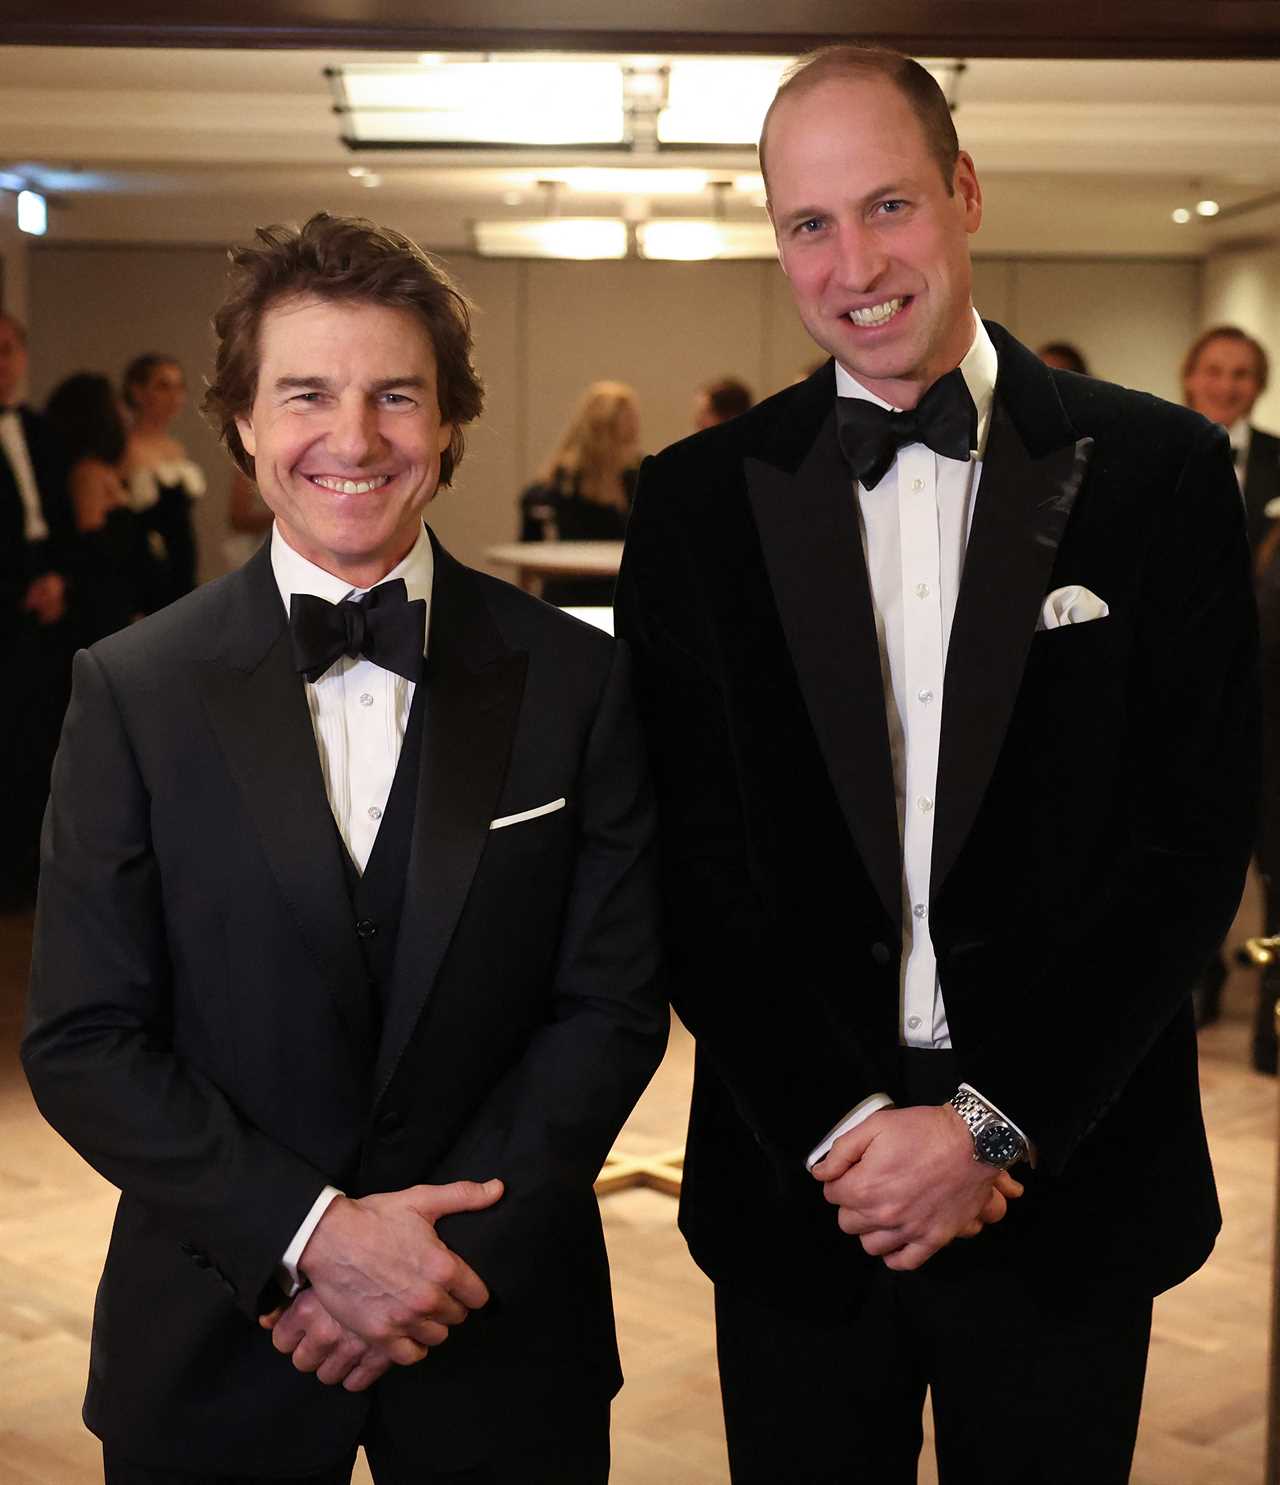 Prince William Thanks Supporters at Charity Gala, Joined by Tom Cruise